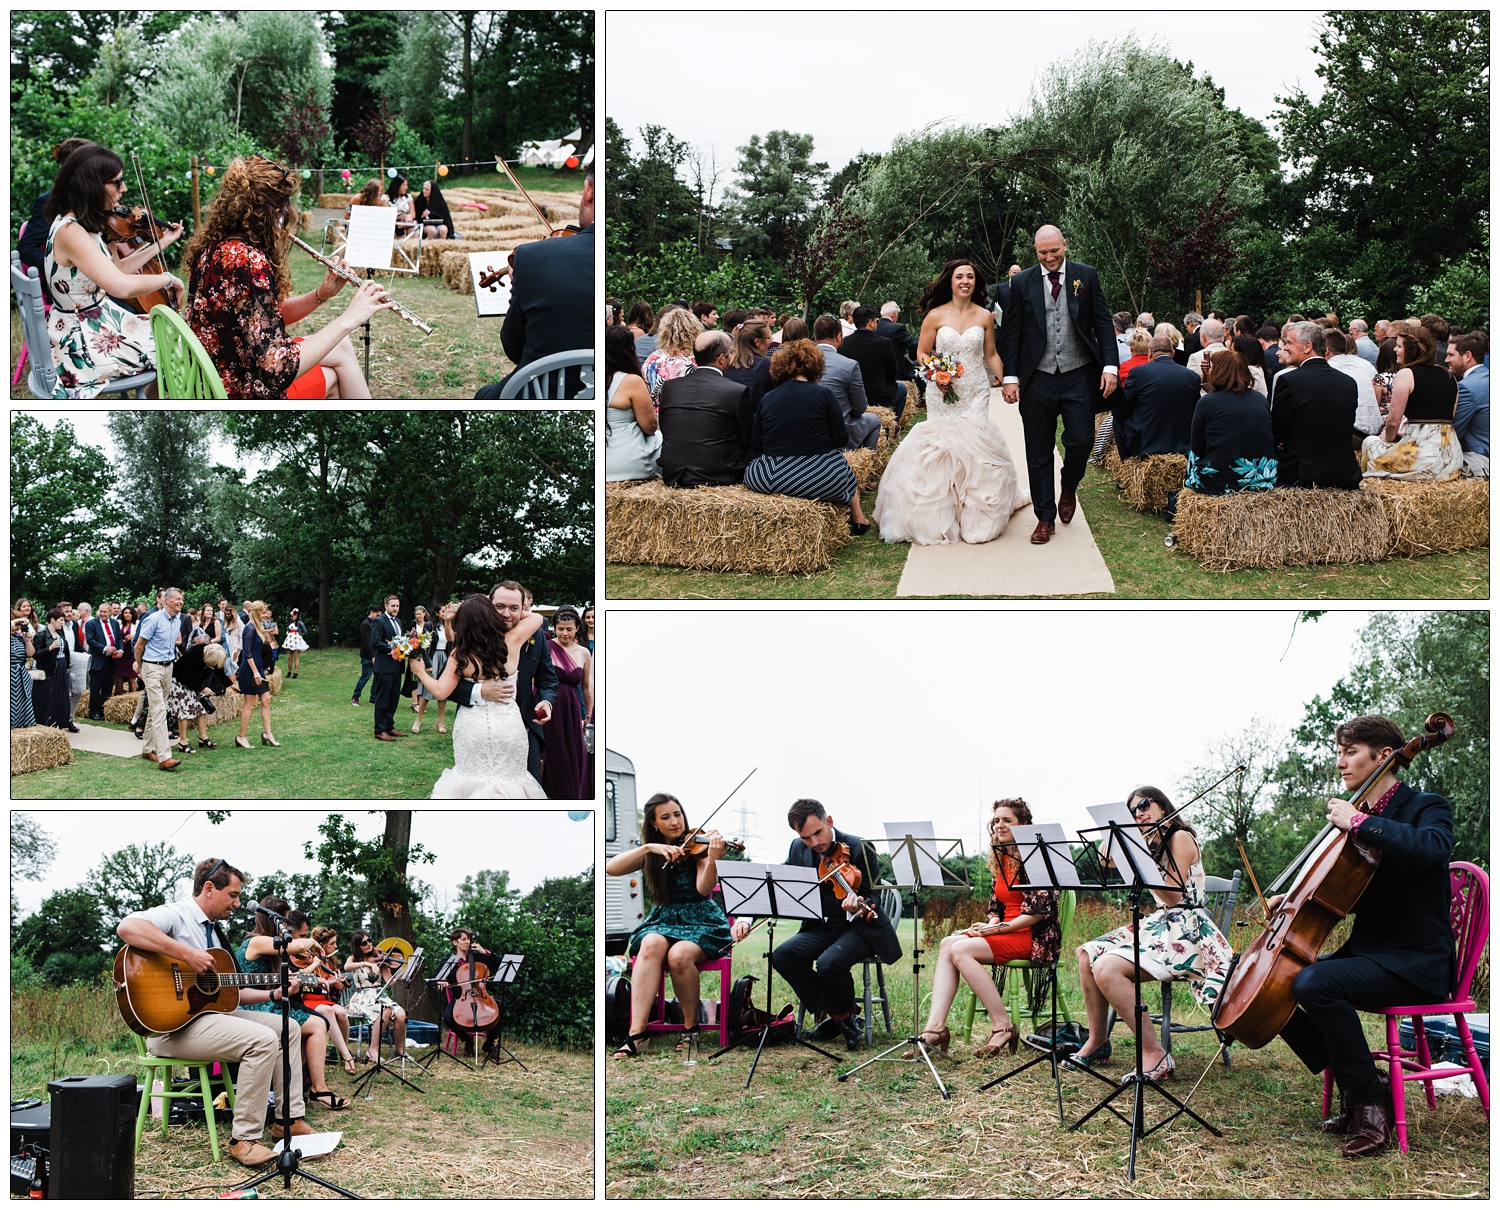 Musicians playing as the bride and groom walk down the aisle in between hay bales.